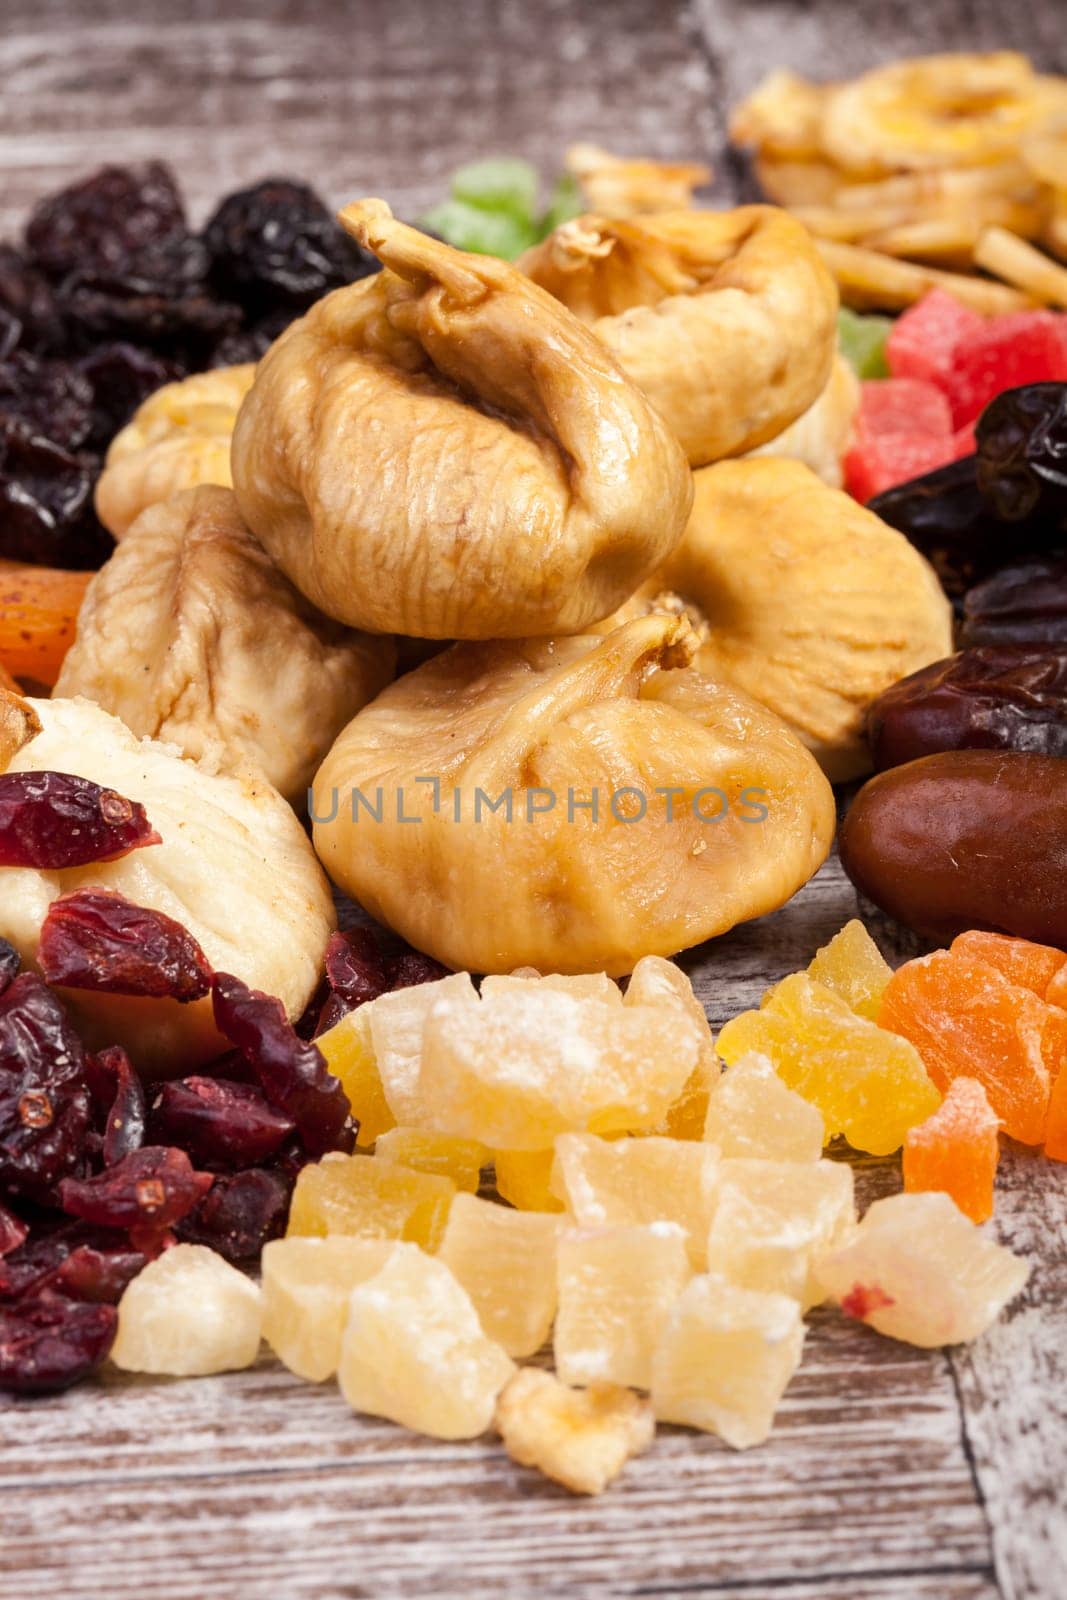 Dried healthy nuts on wooden background by DCStudio